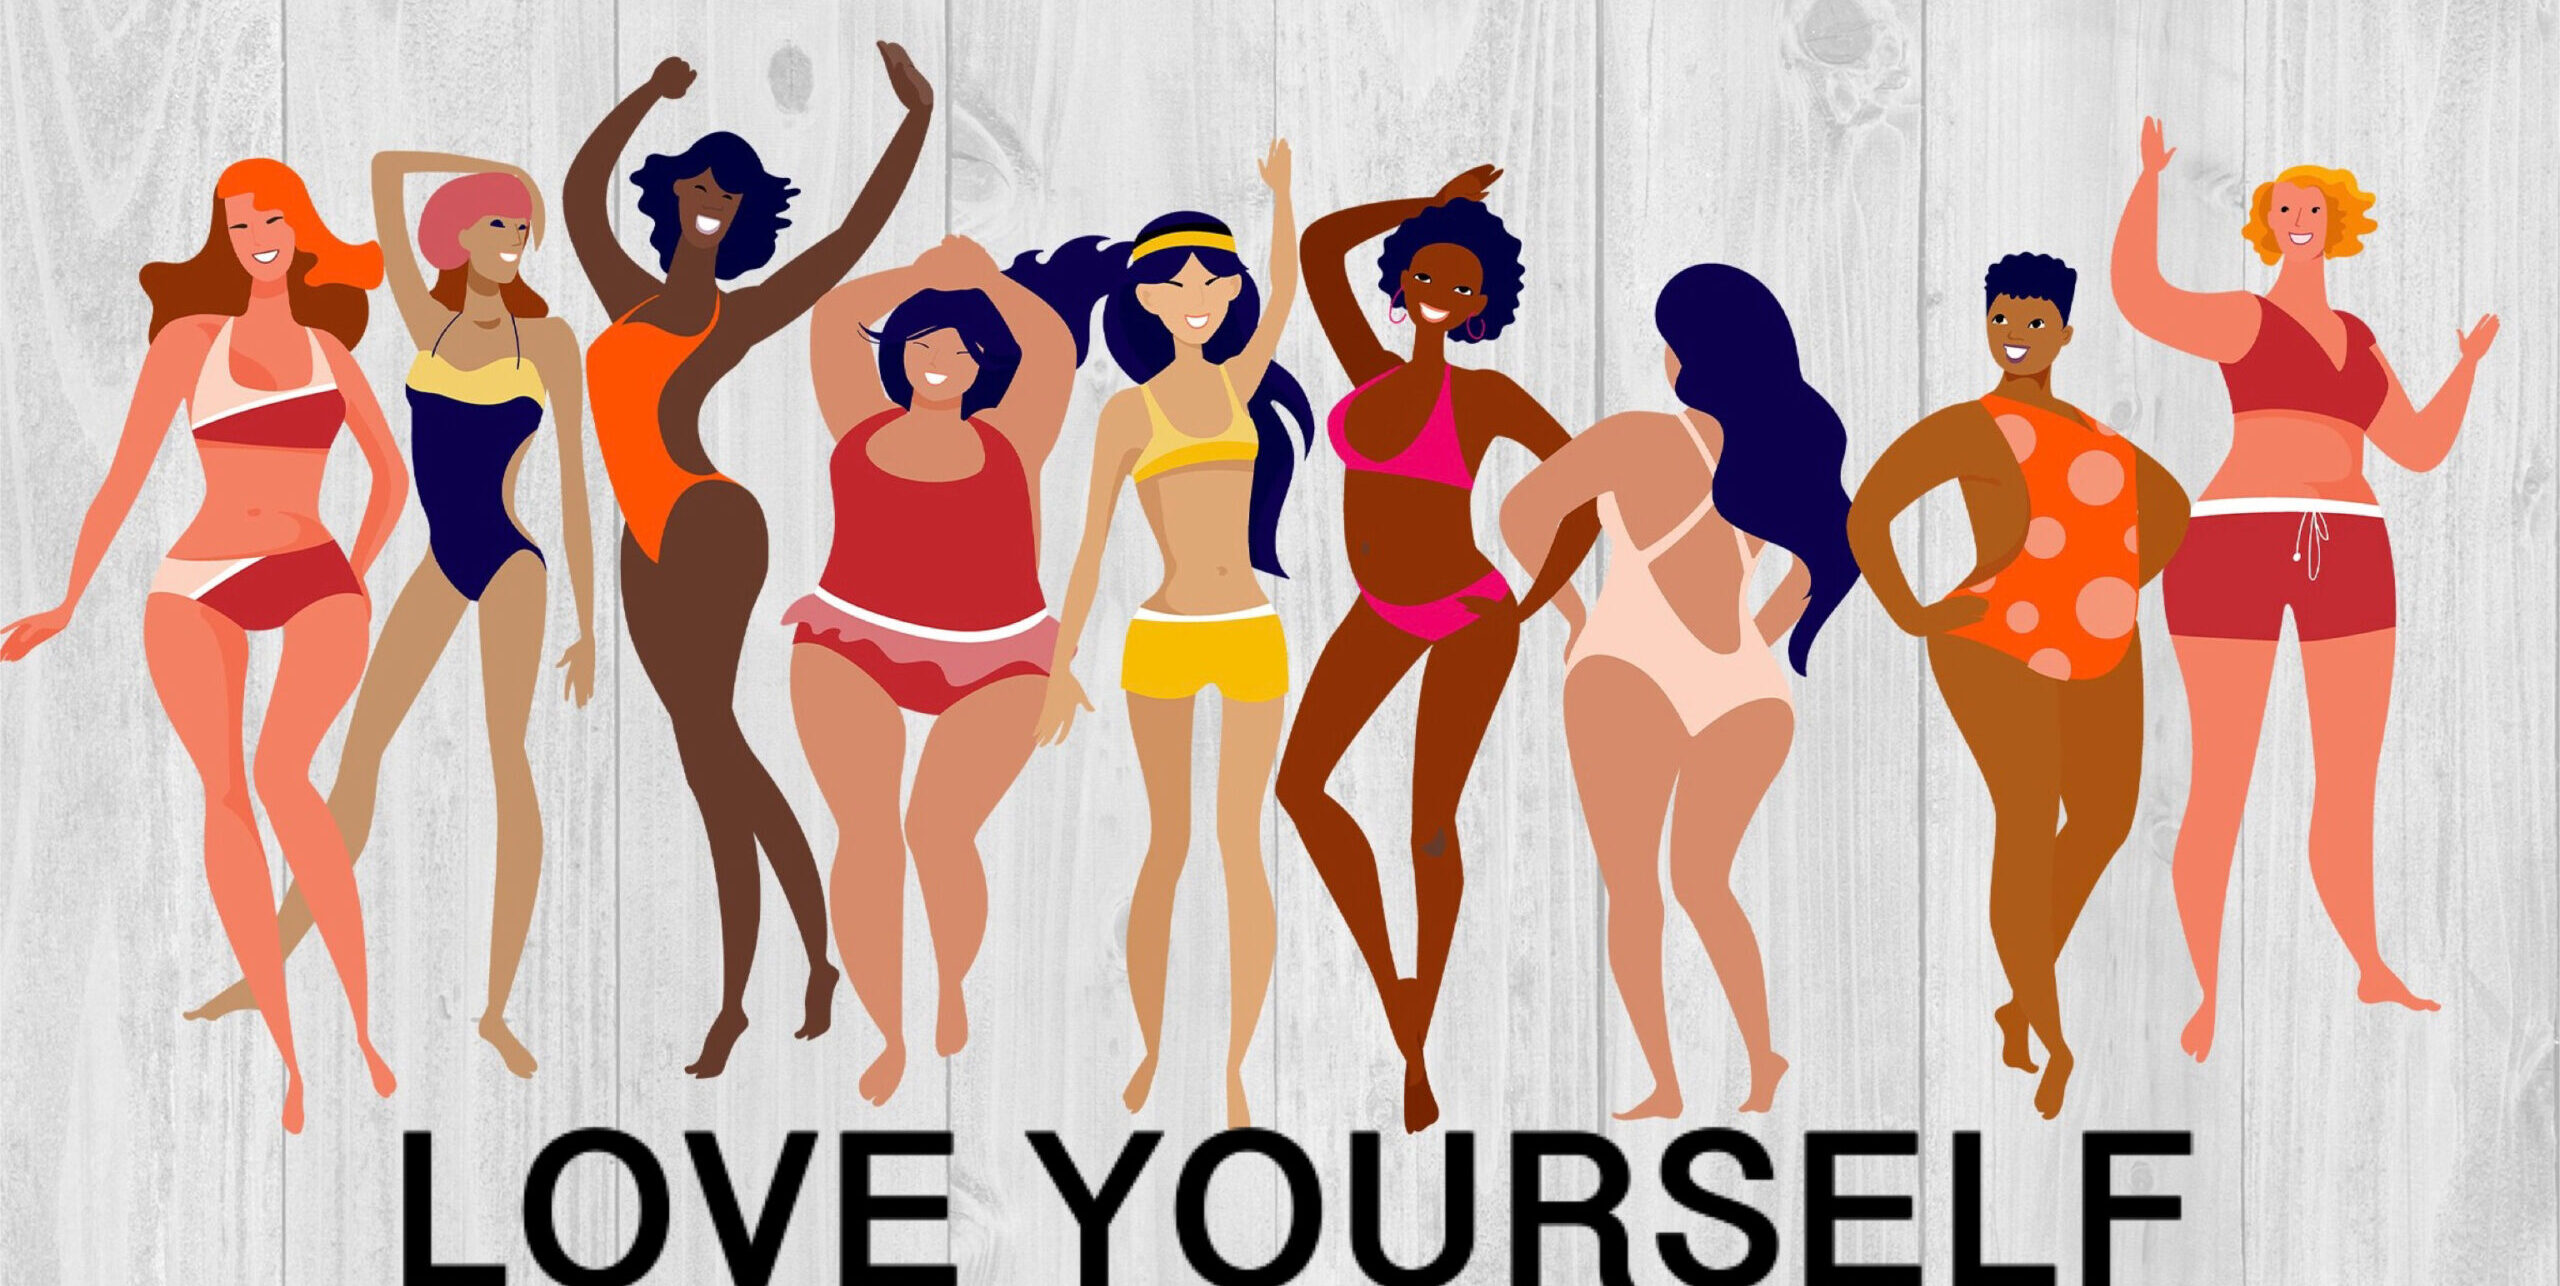 23-Year-Old Blogger Founded Body-Positive #SaggyBoobsMatter